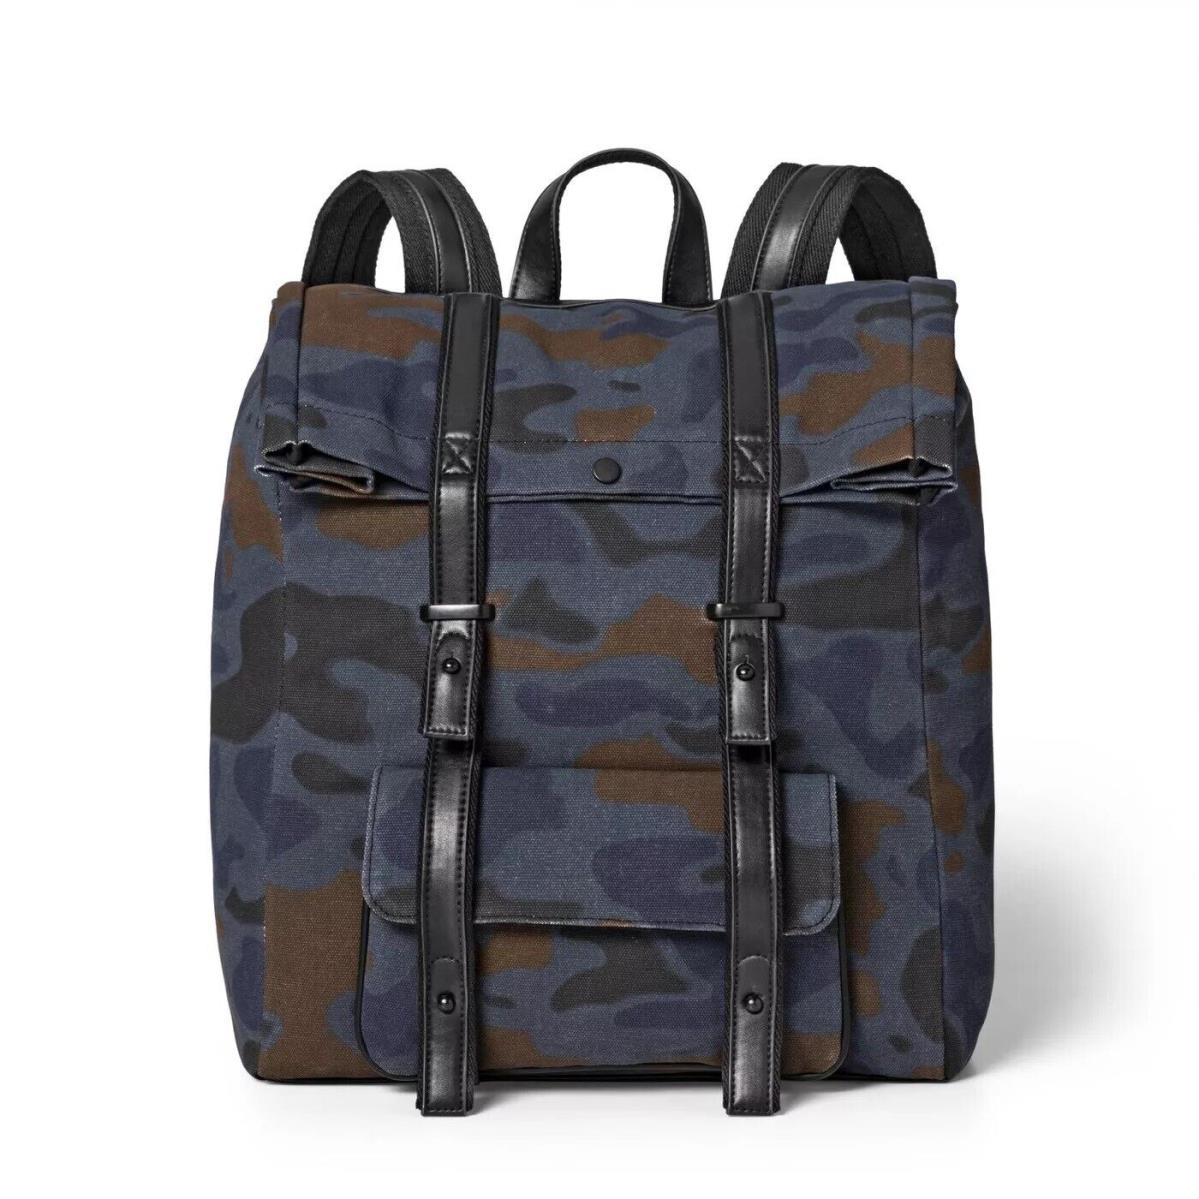 3.1 Phillip Lim For Target Navy Blue/brown Camo Canvas Backpack